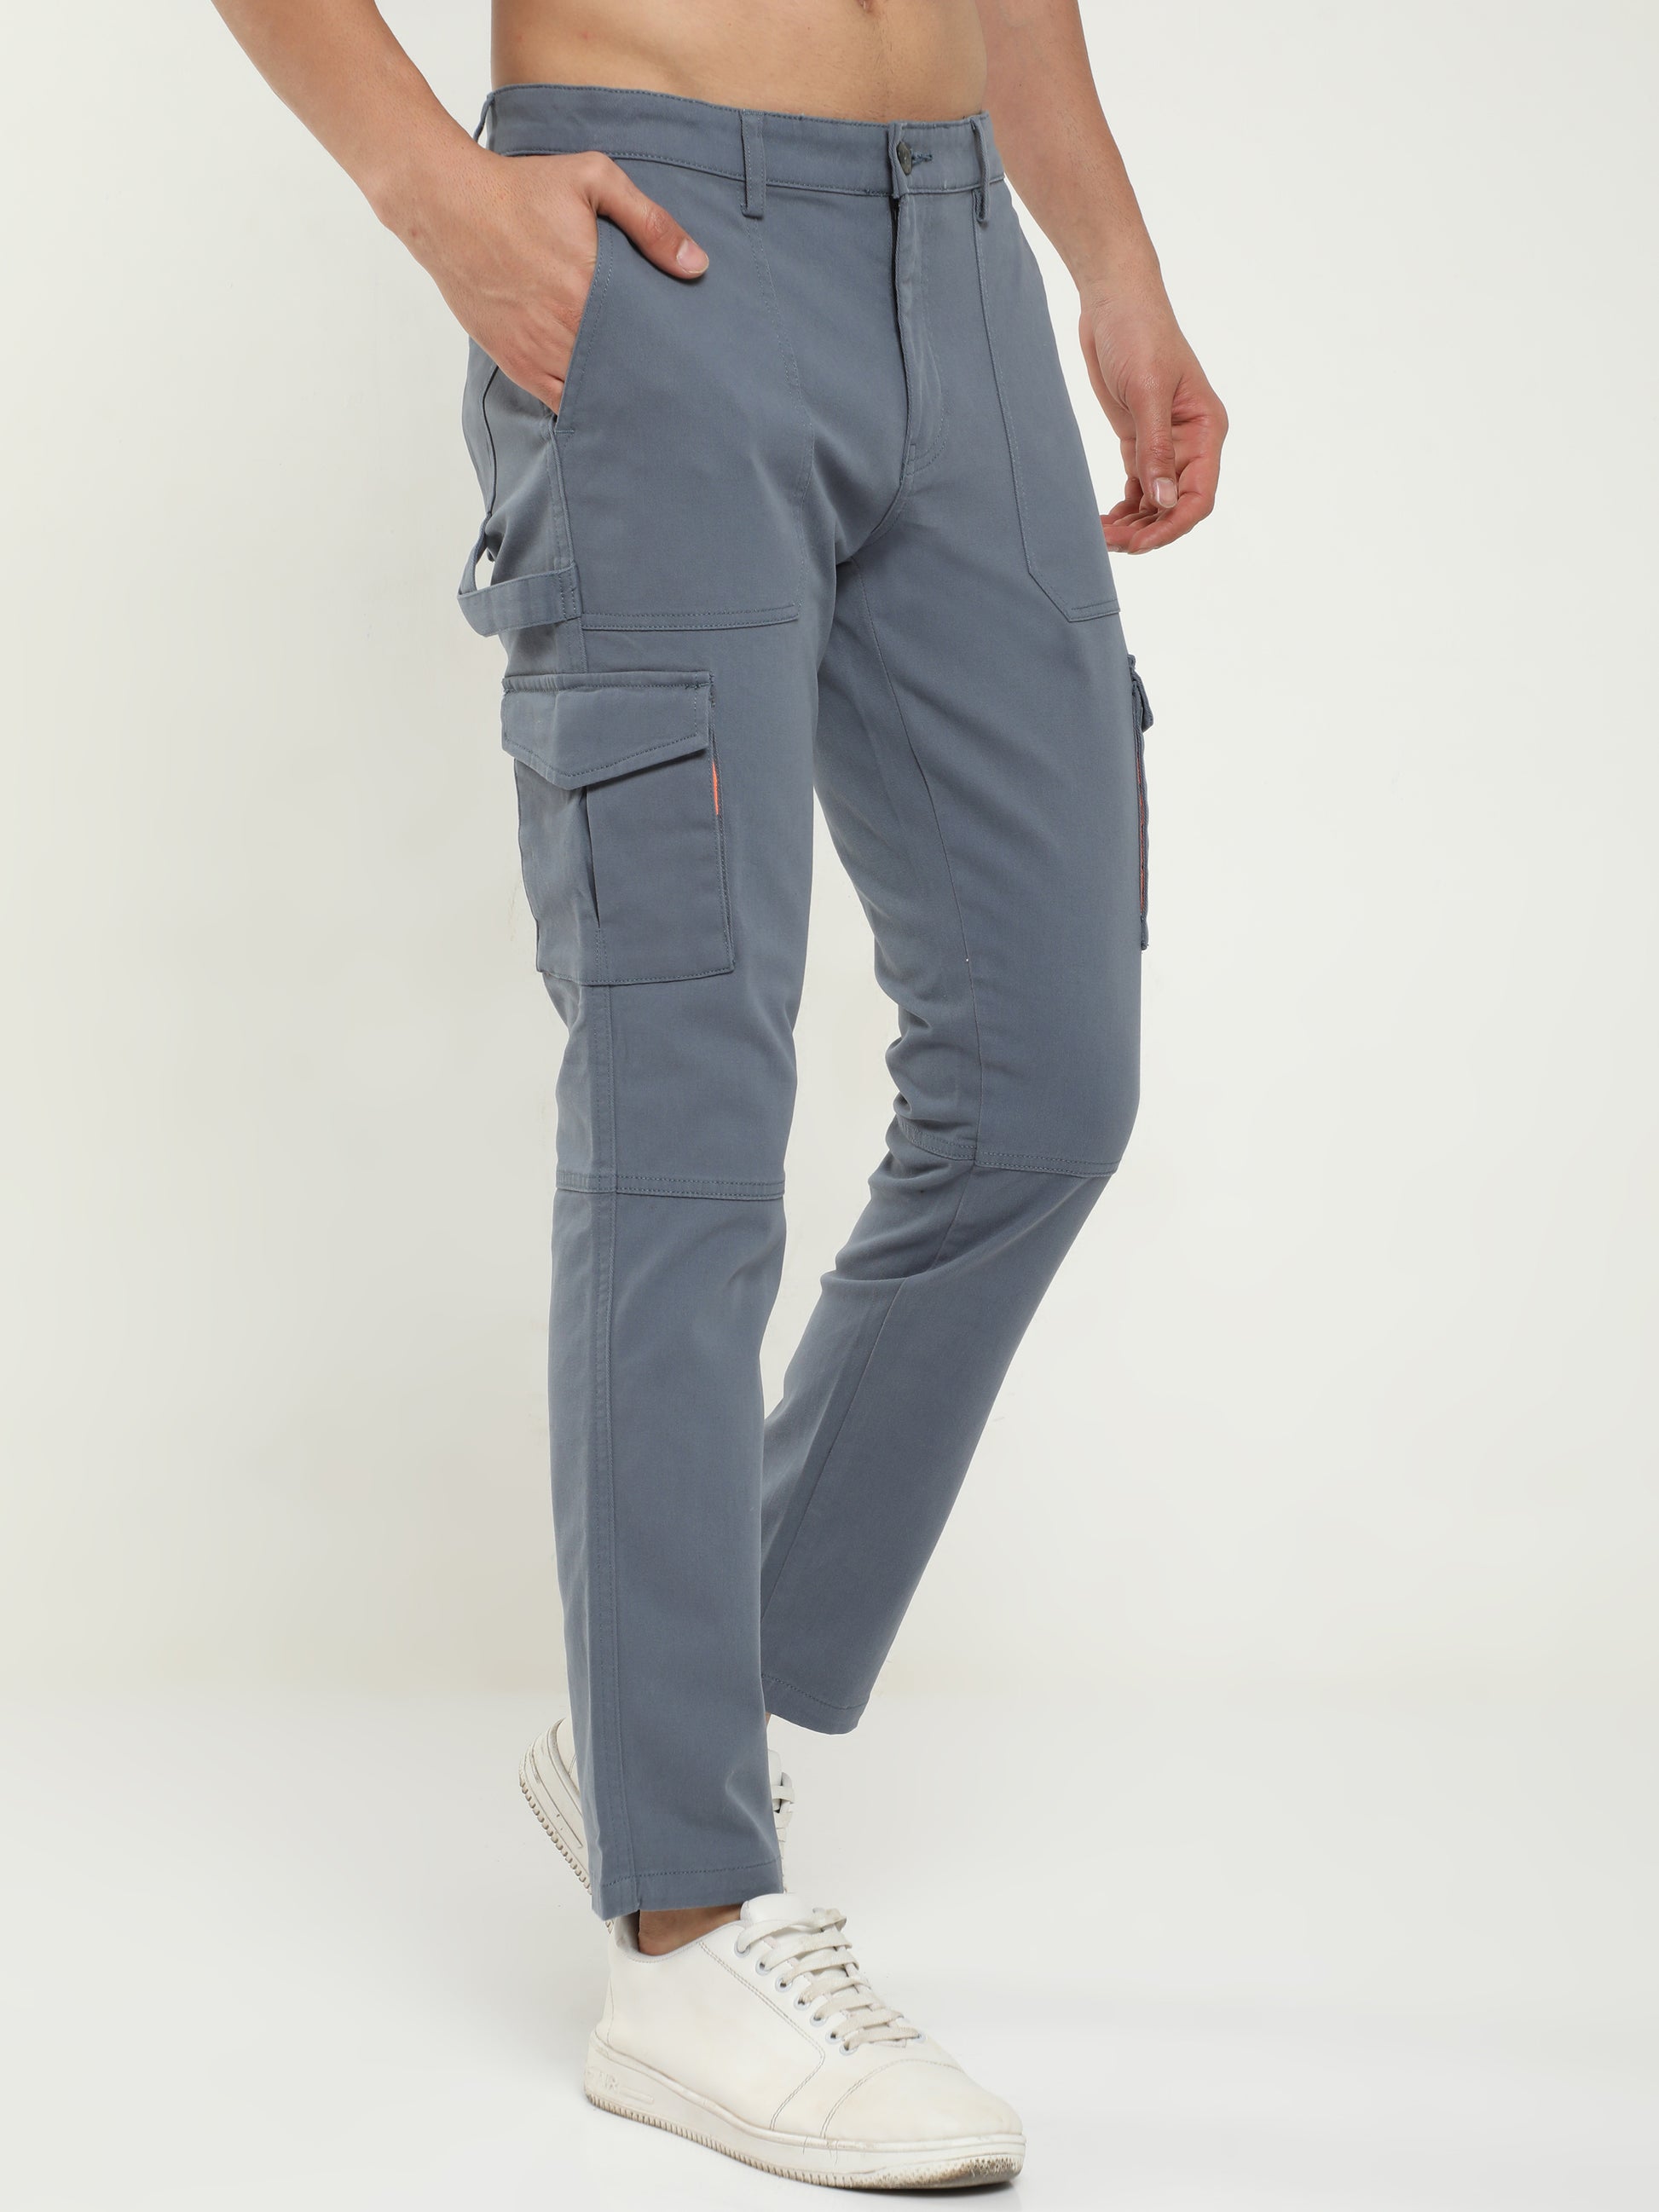 Shop Stylish Grey Cargo Pants Mens Online – Marquee Industries